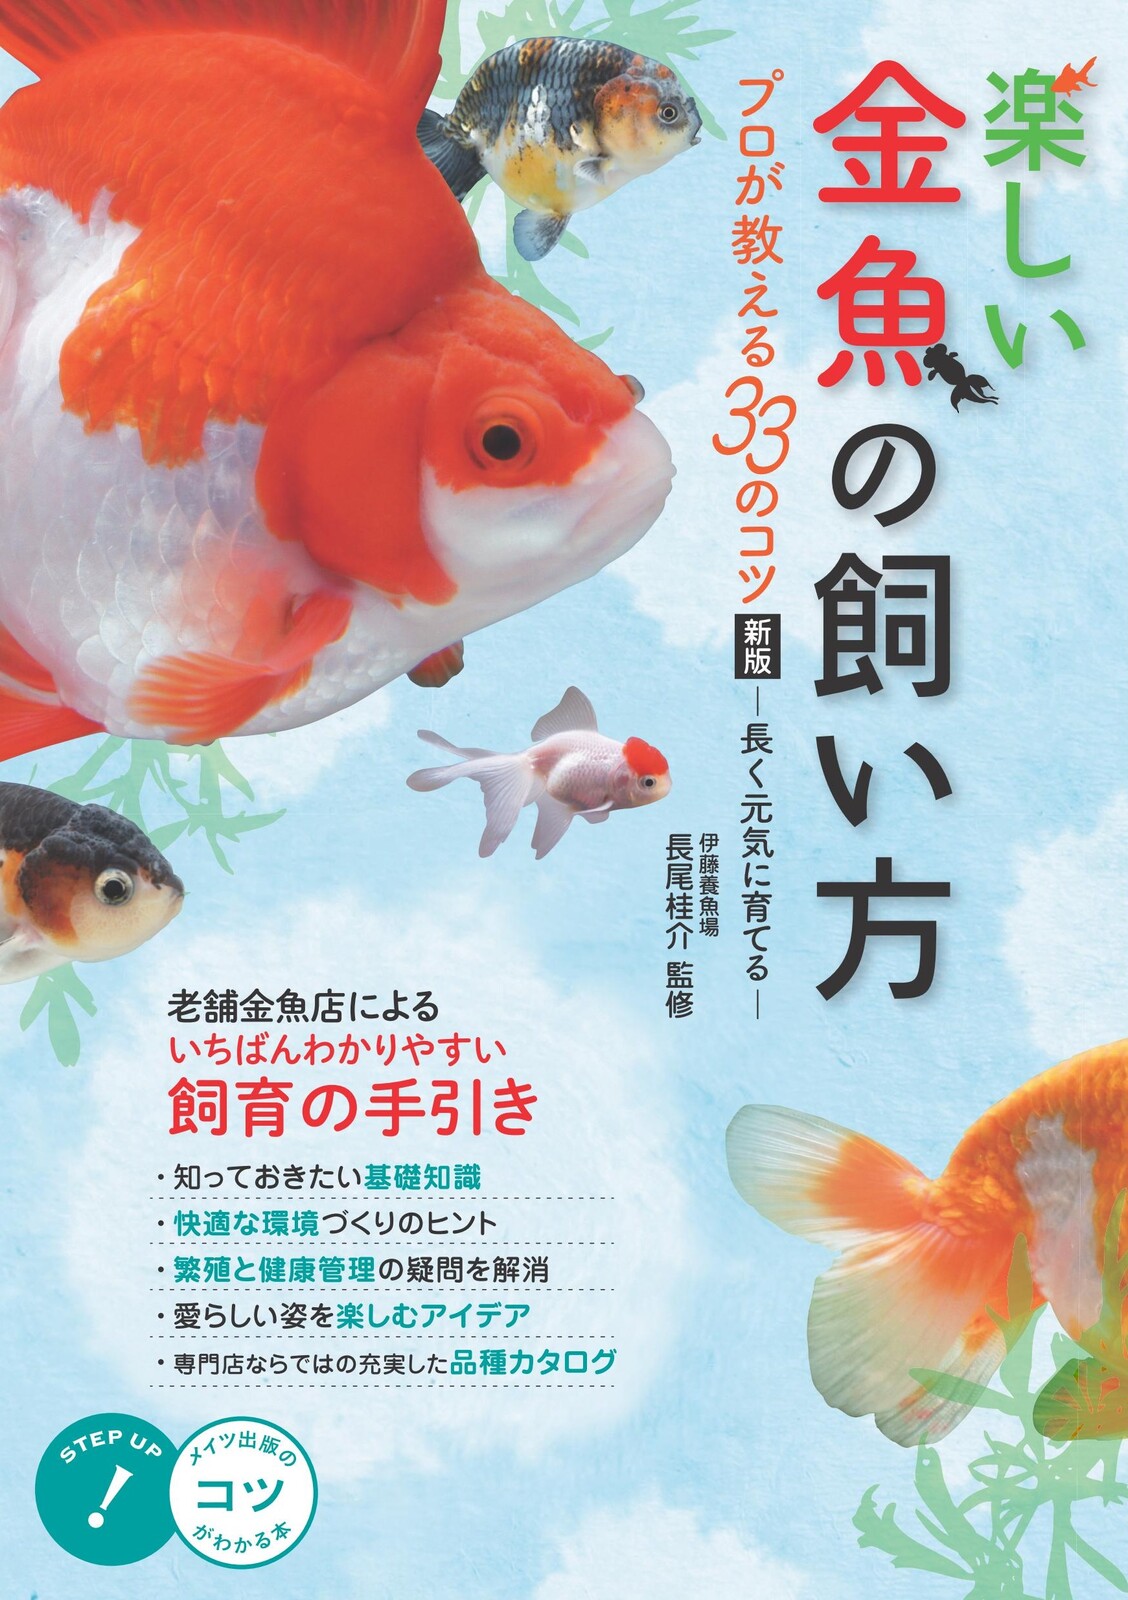 Pleasant Goldfish Long Fine Import Japanese Products At Wholesale Prices Super Delivery